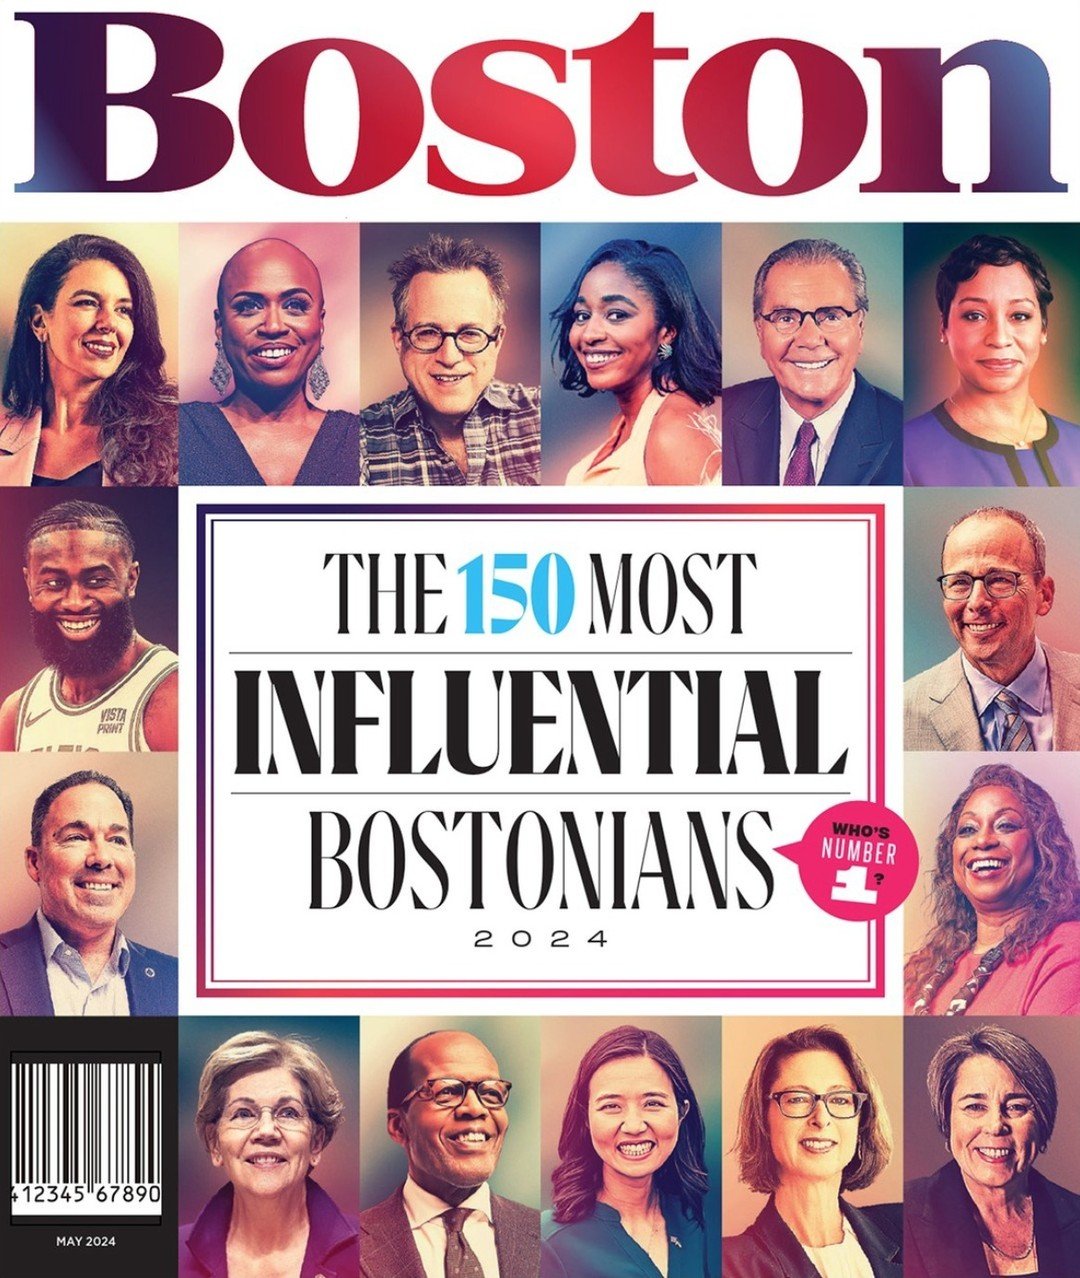 Three cheers for the powerful and influential @bostonmagazine 150 list! We are thrilled to see so many friends of Give Black Alliance featured and their work, causes, and successes spotlighted so positively!

Photo credits: Getty Images/Samir Hussein